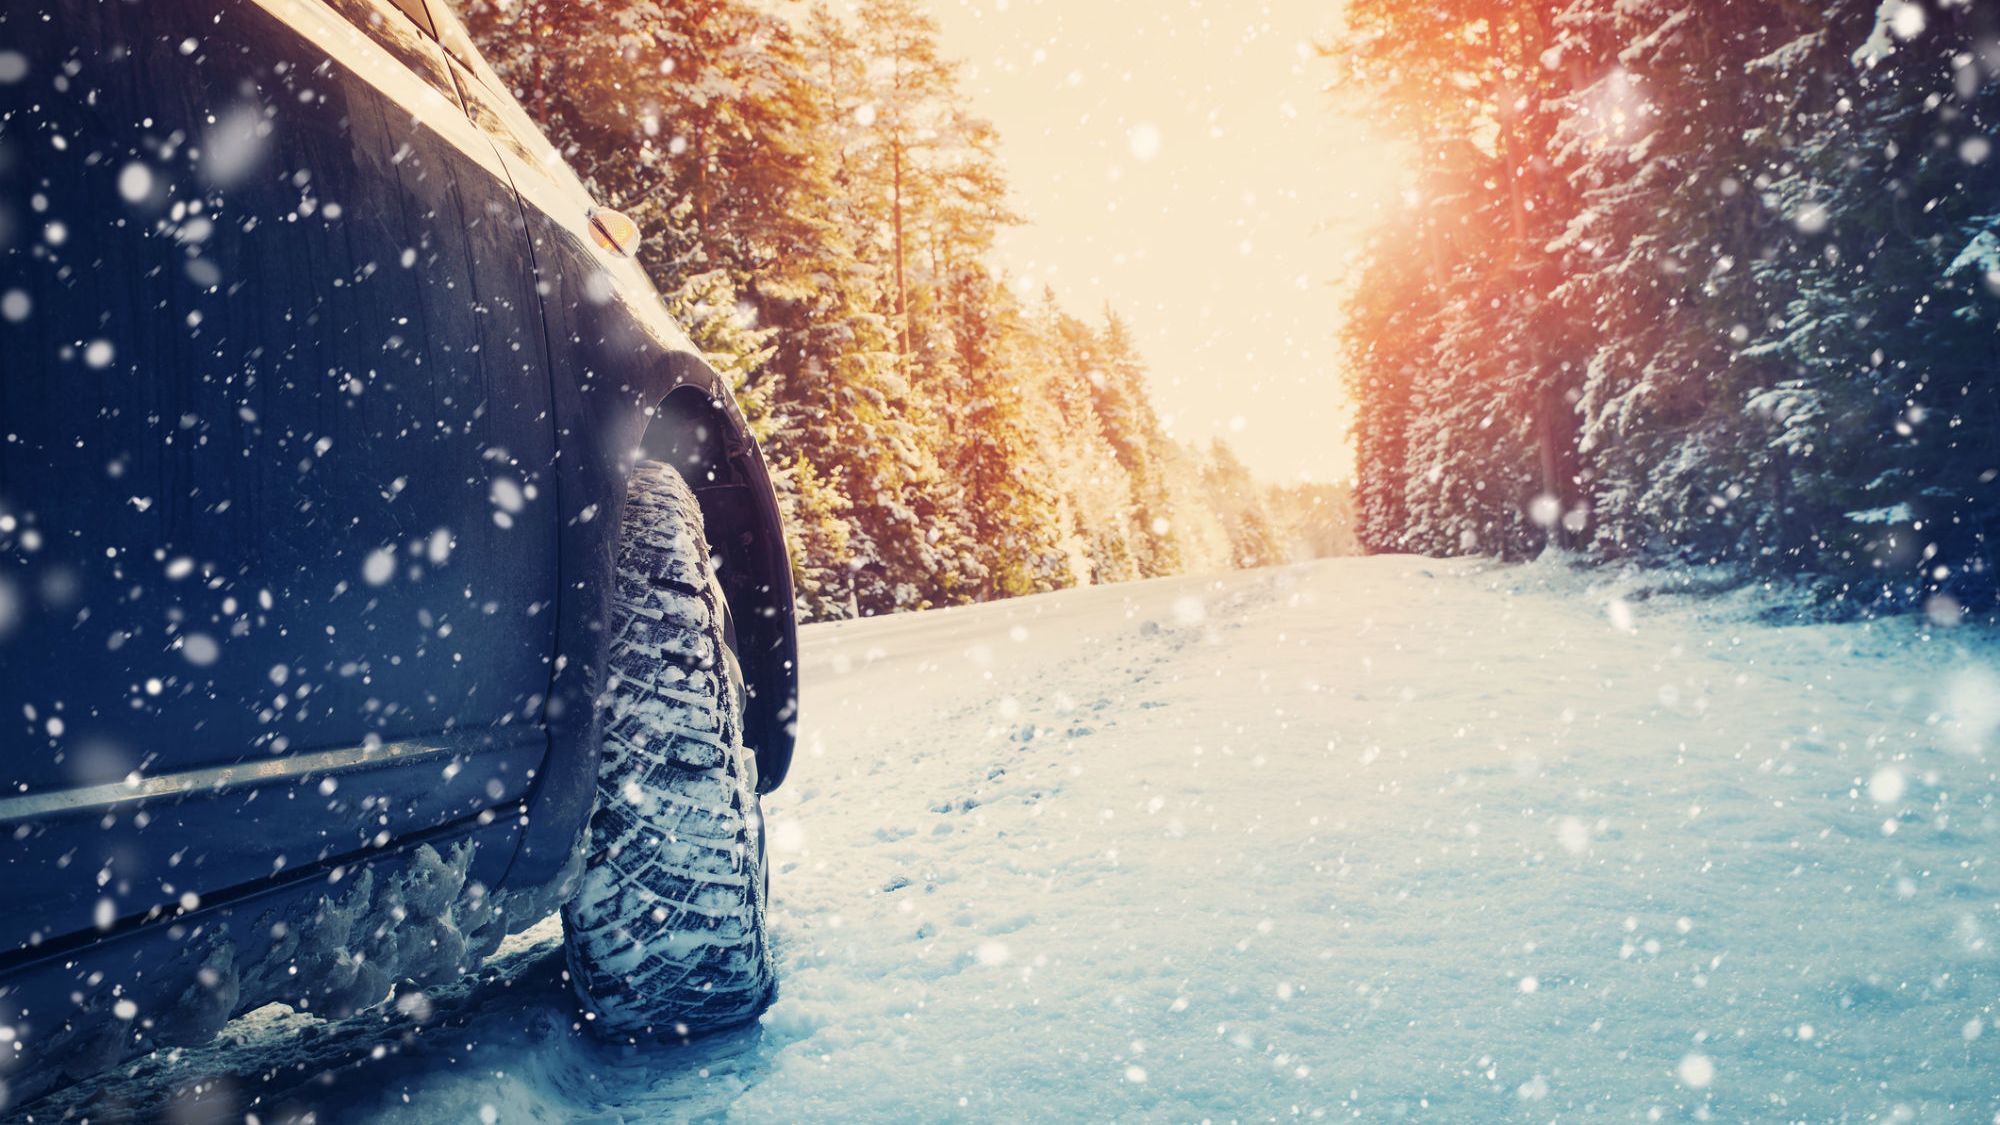 Flurry Road: 5 Tips for Safe Driving on Winter Roads | Mental Floss